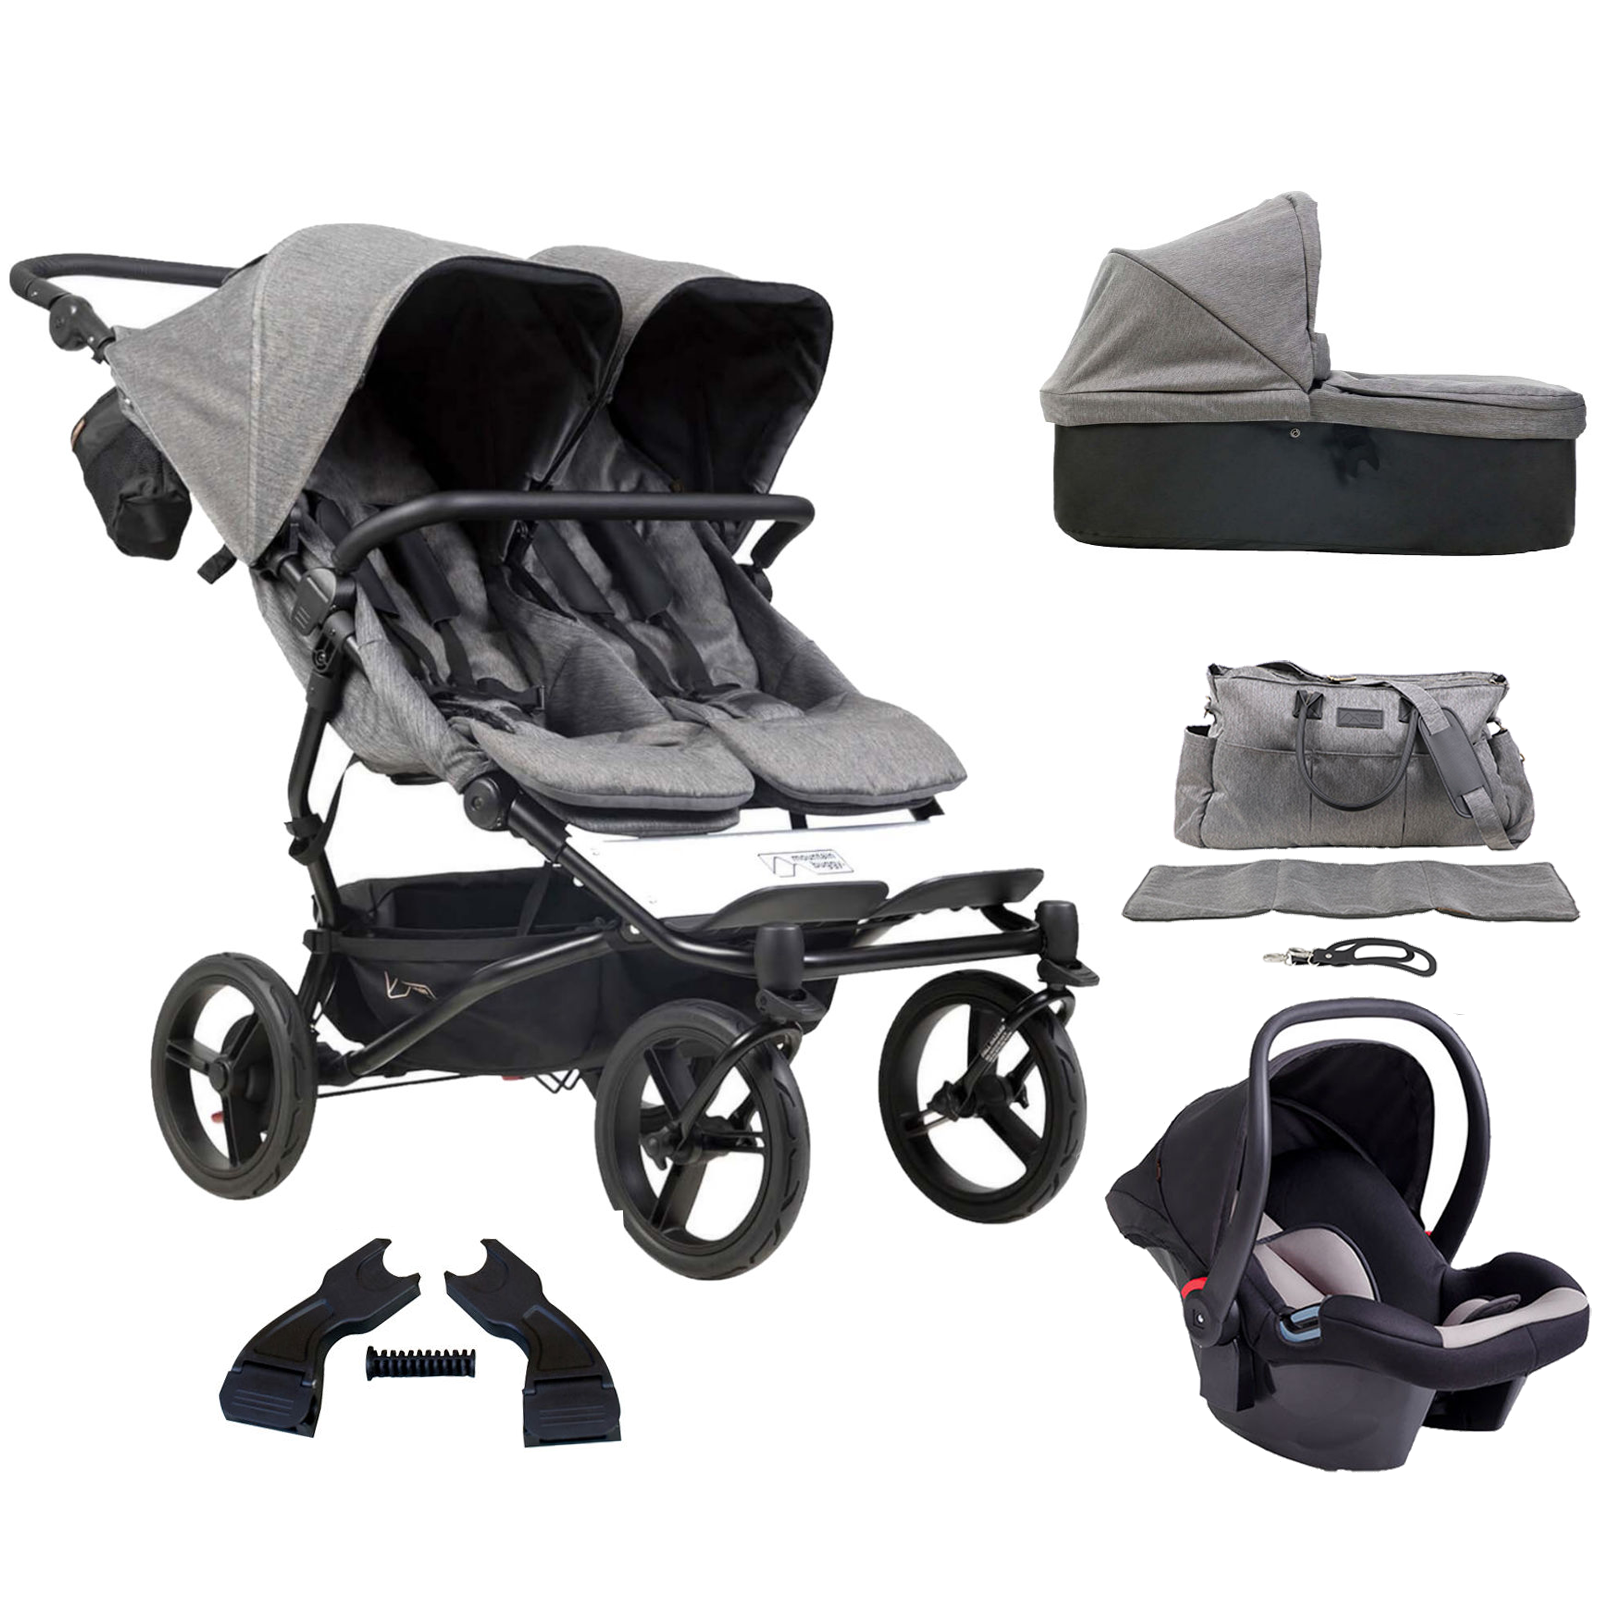 Mountain Buggy Duet Luxury Twin (Protect) Travel System With Carrycot - Herringbone